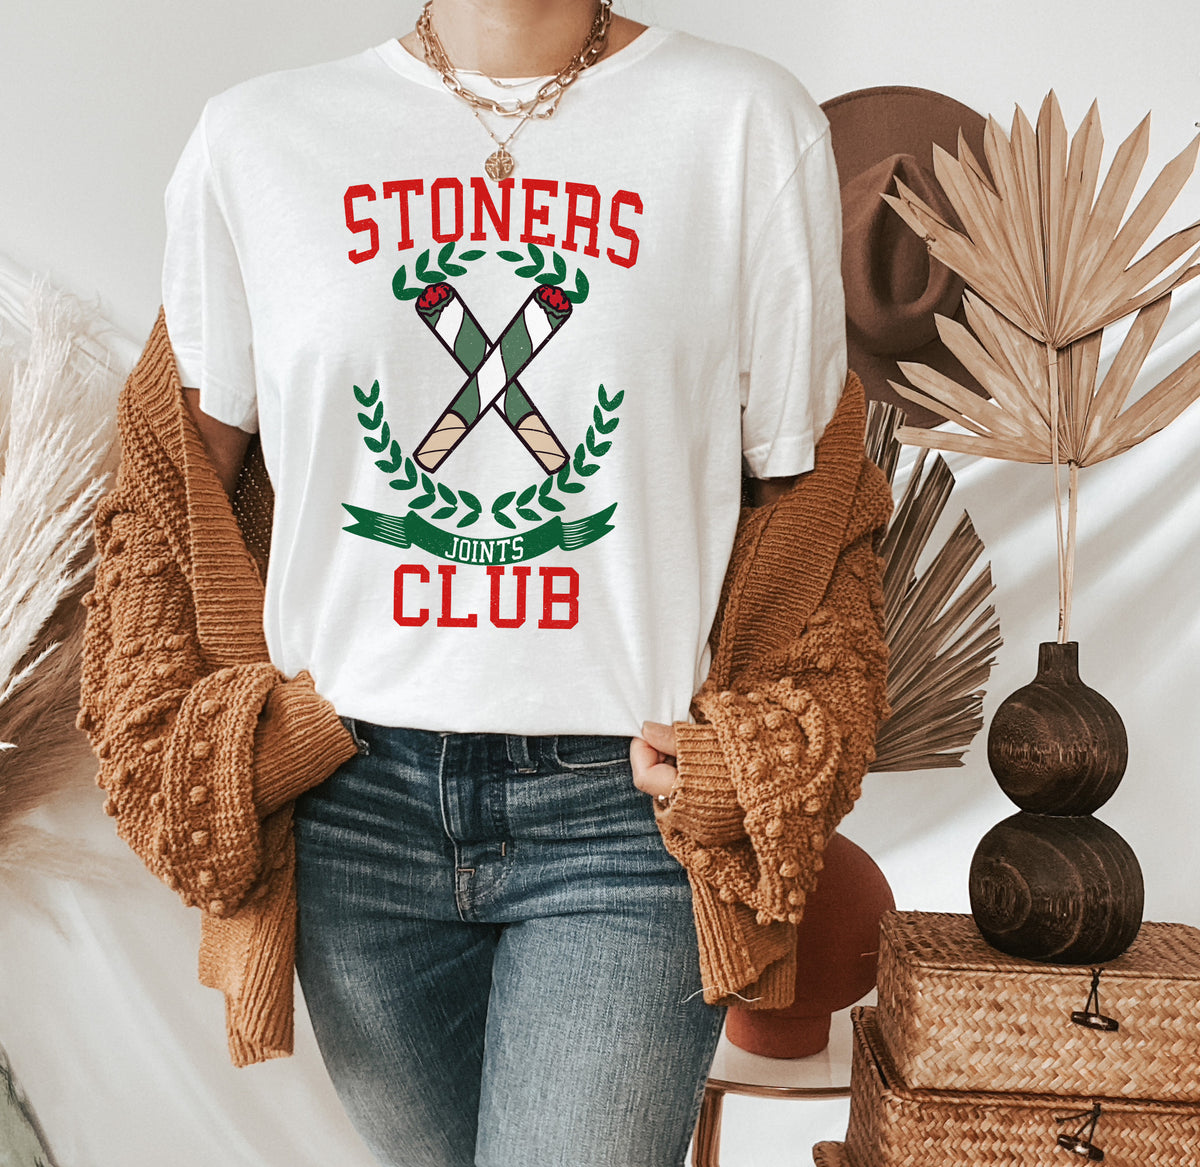 white shirt with joints saying stoners club - HighCiti